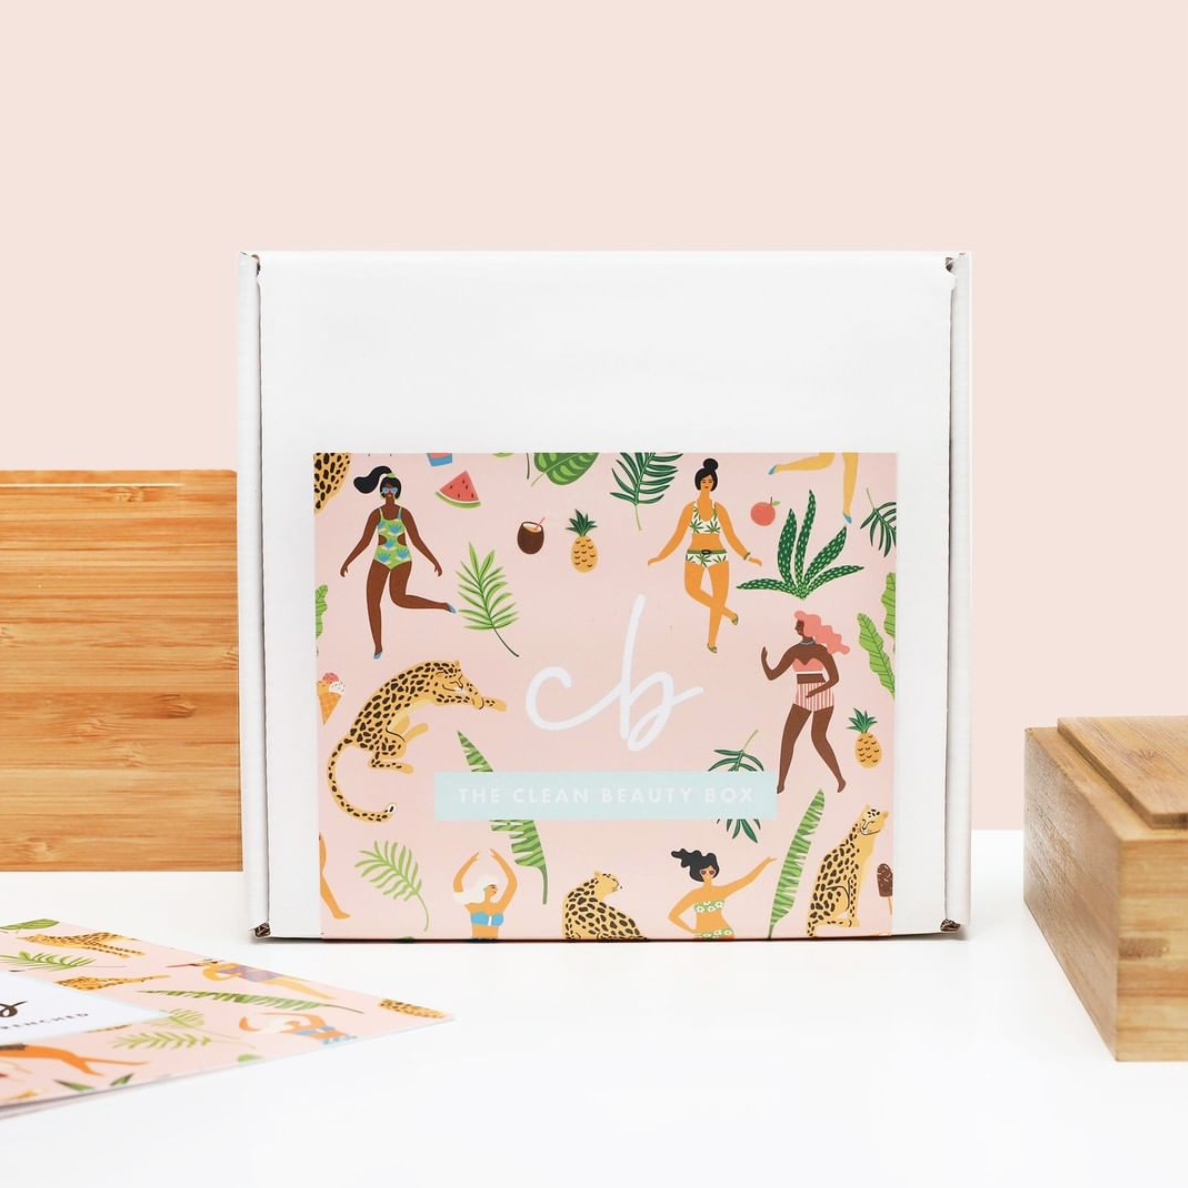 The Clean Beauty Box August 2020 Full Spoilers + Coupon!